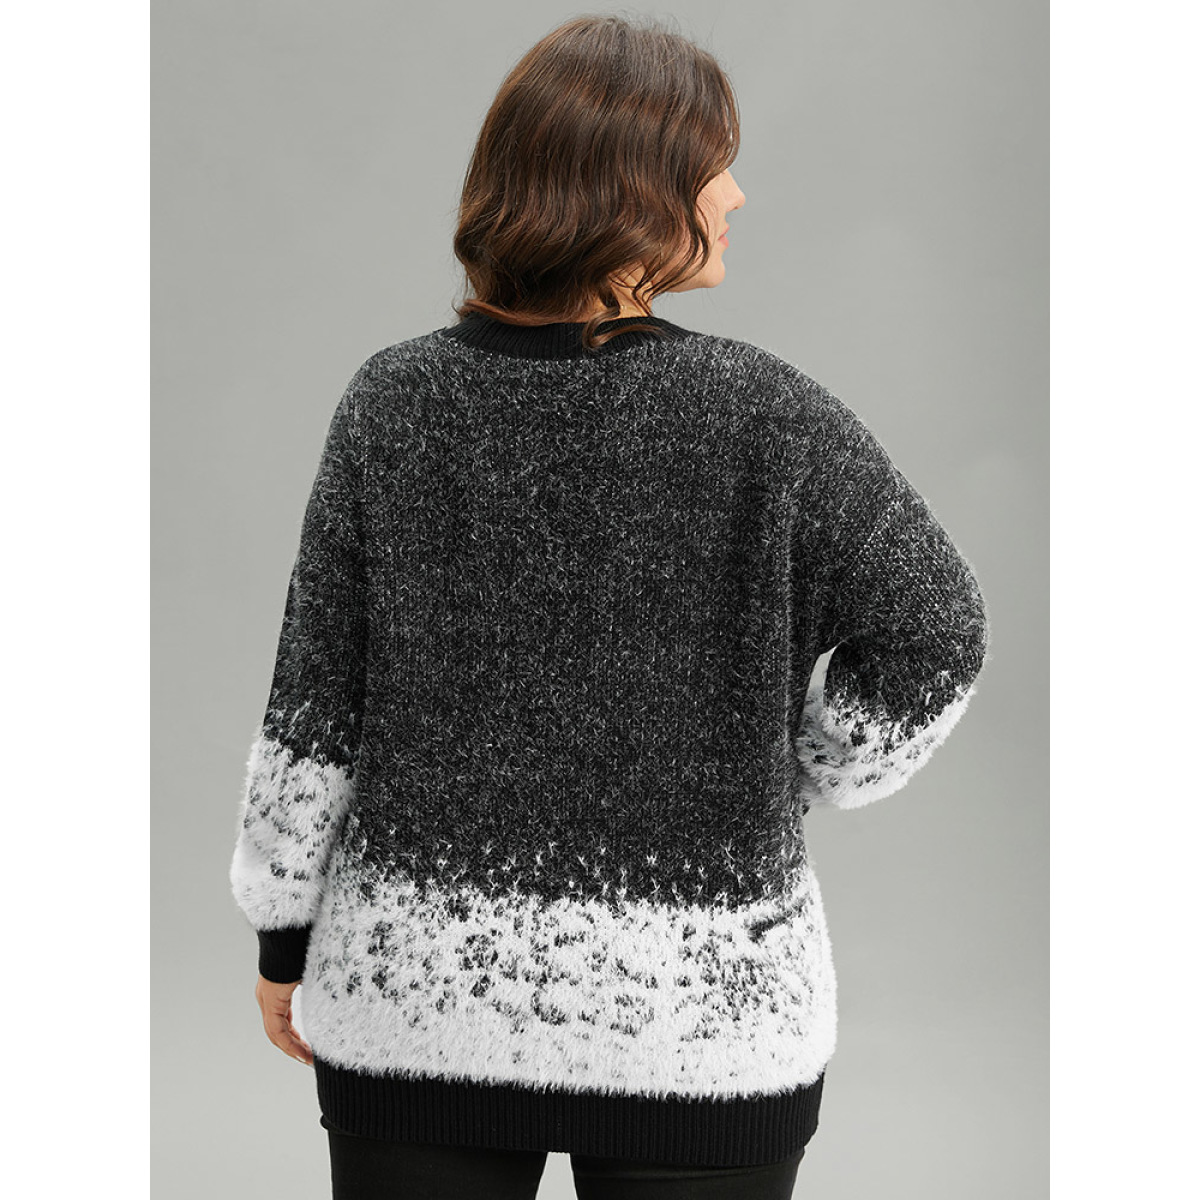 

Plus Size Fuzzy Snowflake Elastic Cuffs Pullover Black Women Casual Loose Long Sleeve Round Neck Festival-Halloween Pullovers BloomChic